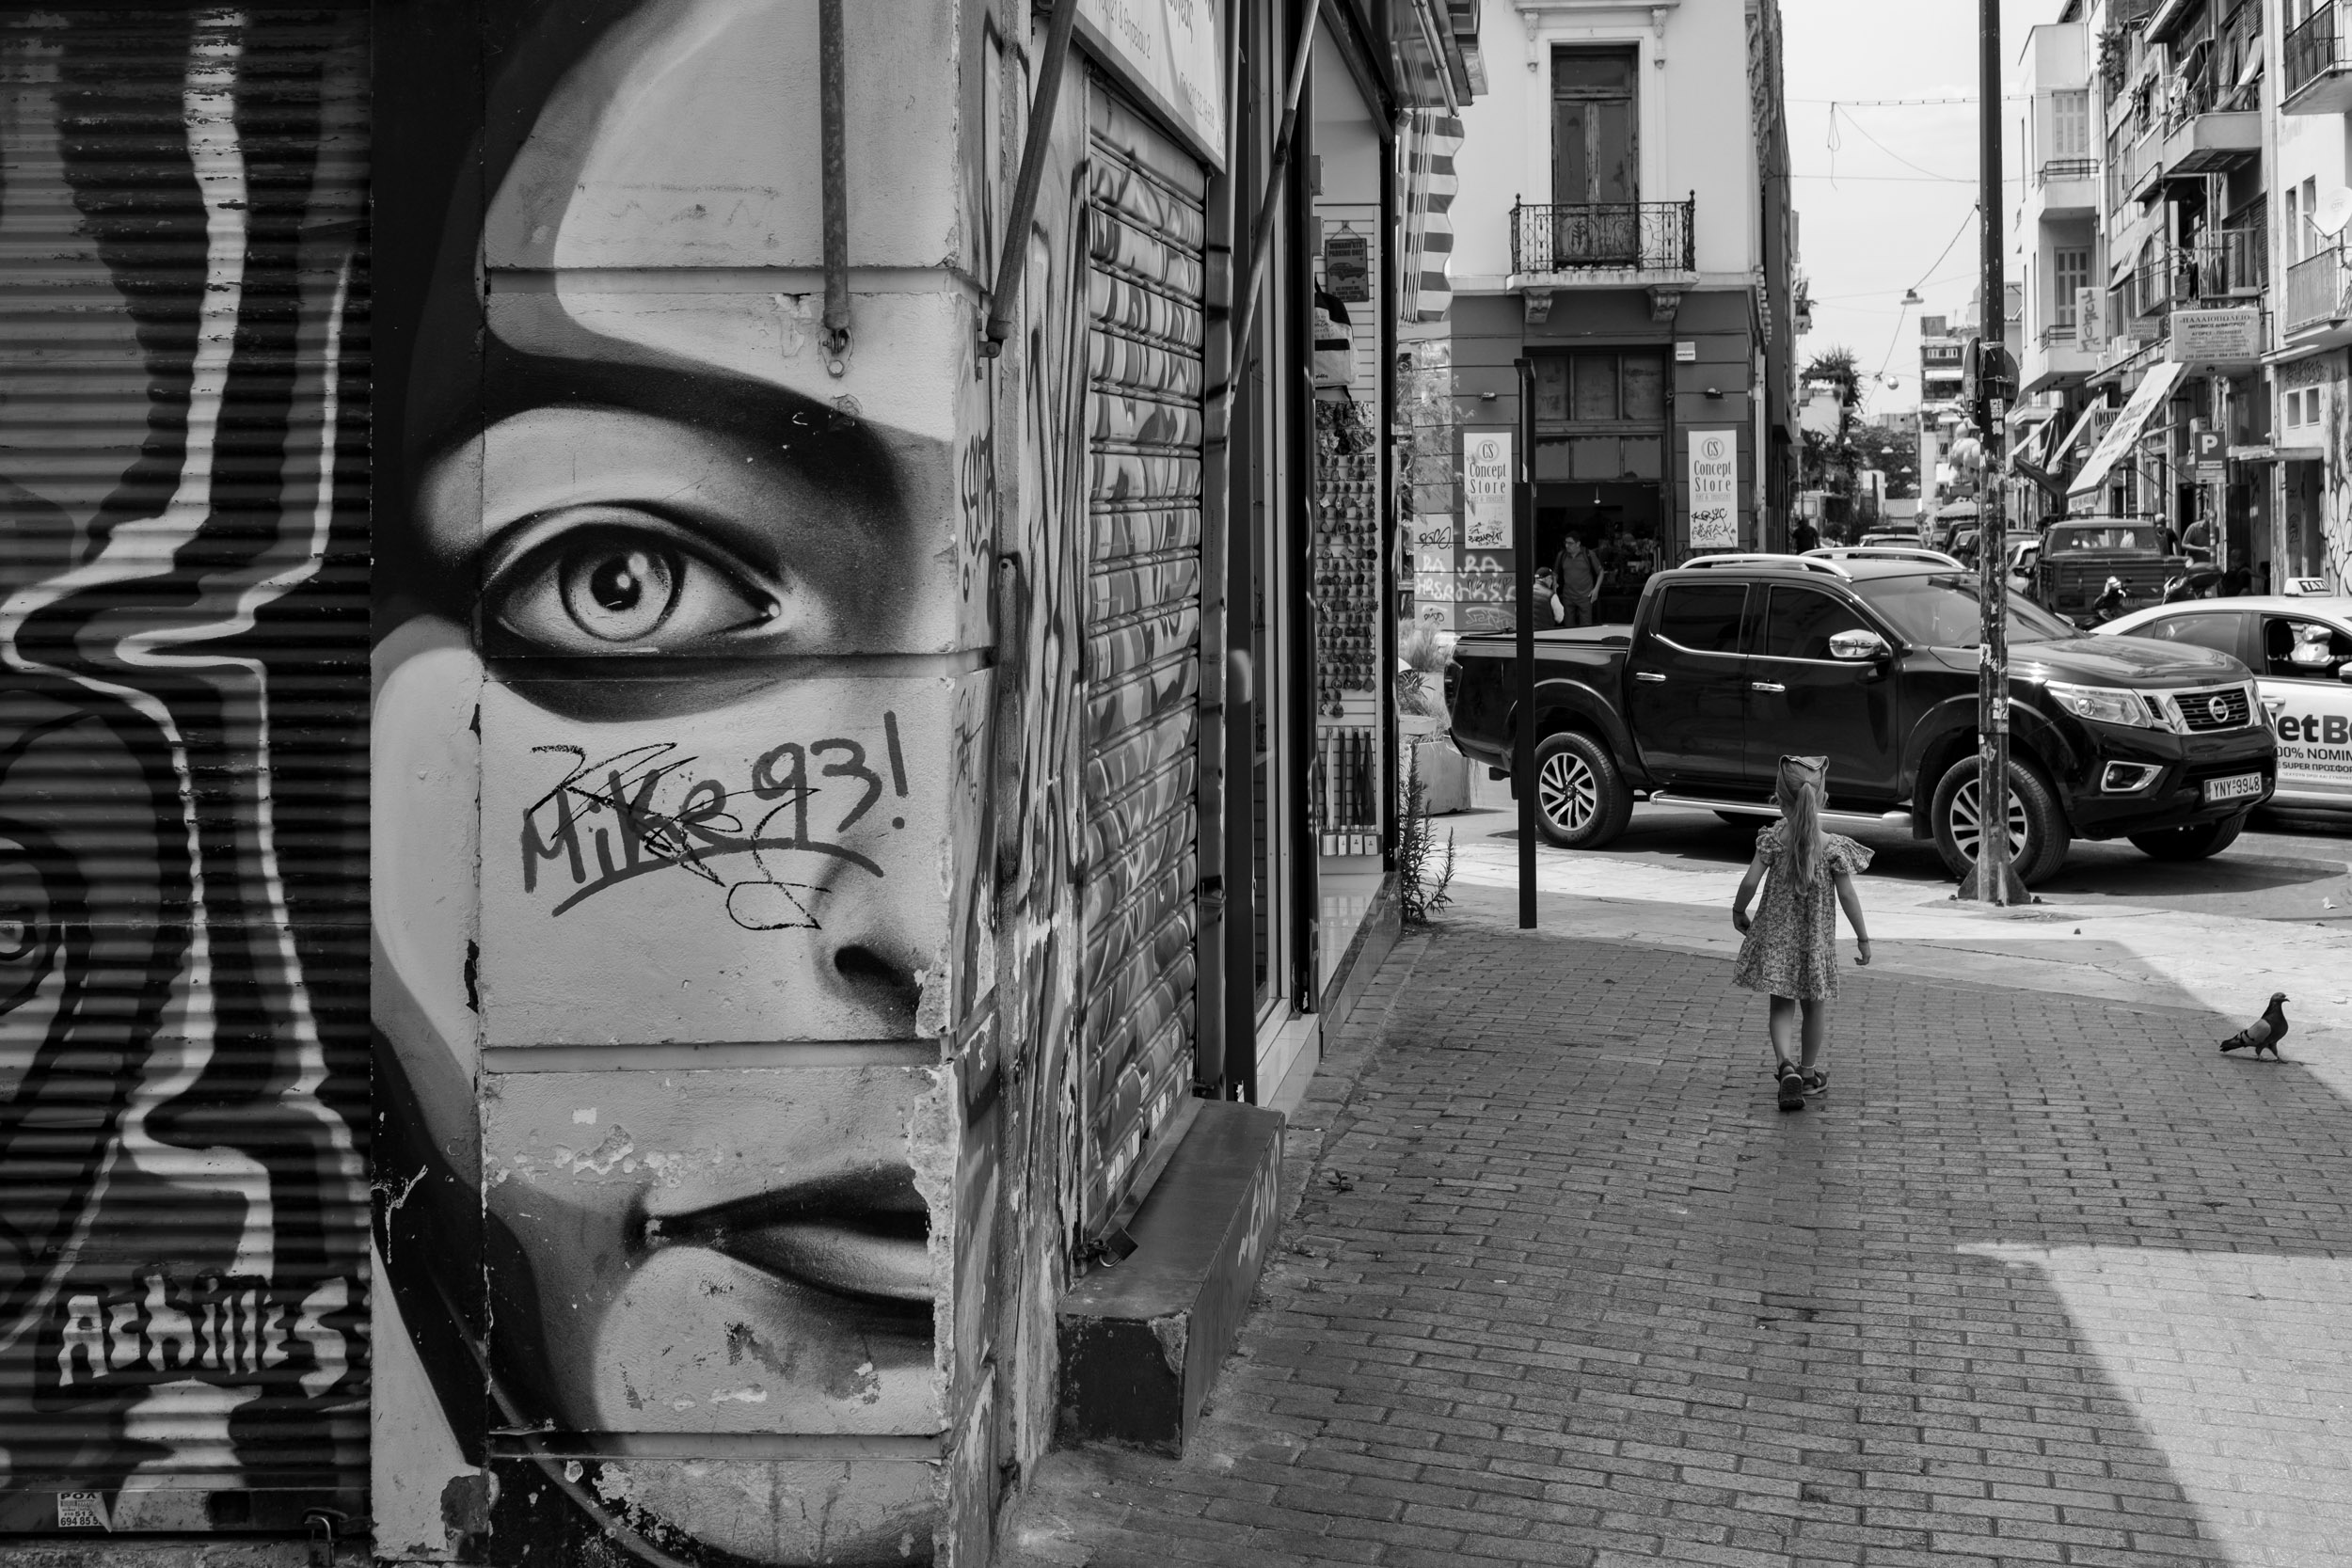 A huge graffiti by "Achilles" with a human head that looks strait at you. And my daughter walking on the street besides it.